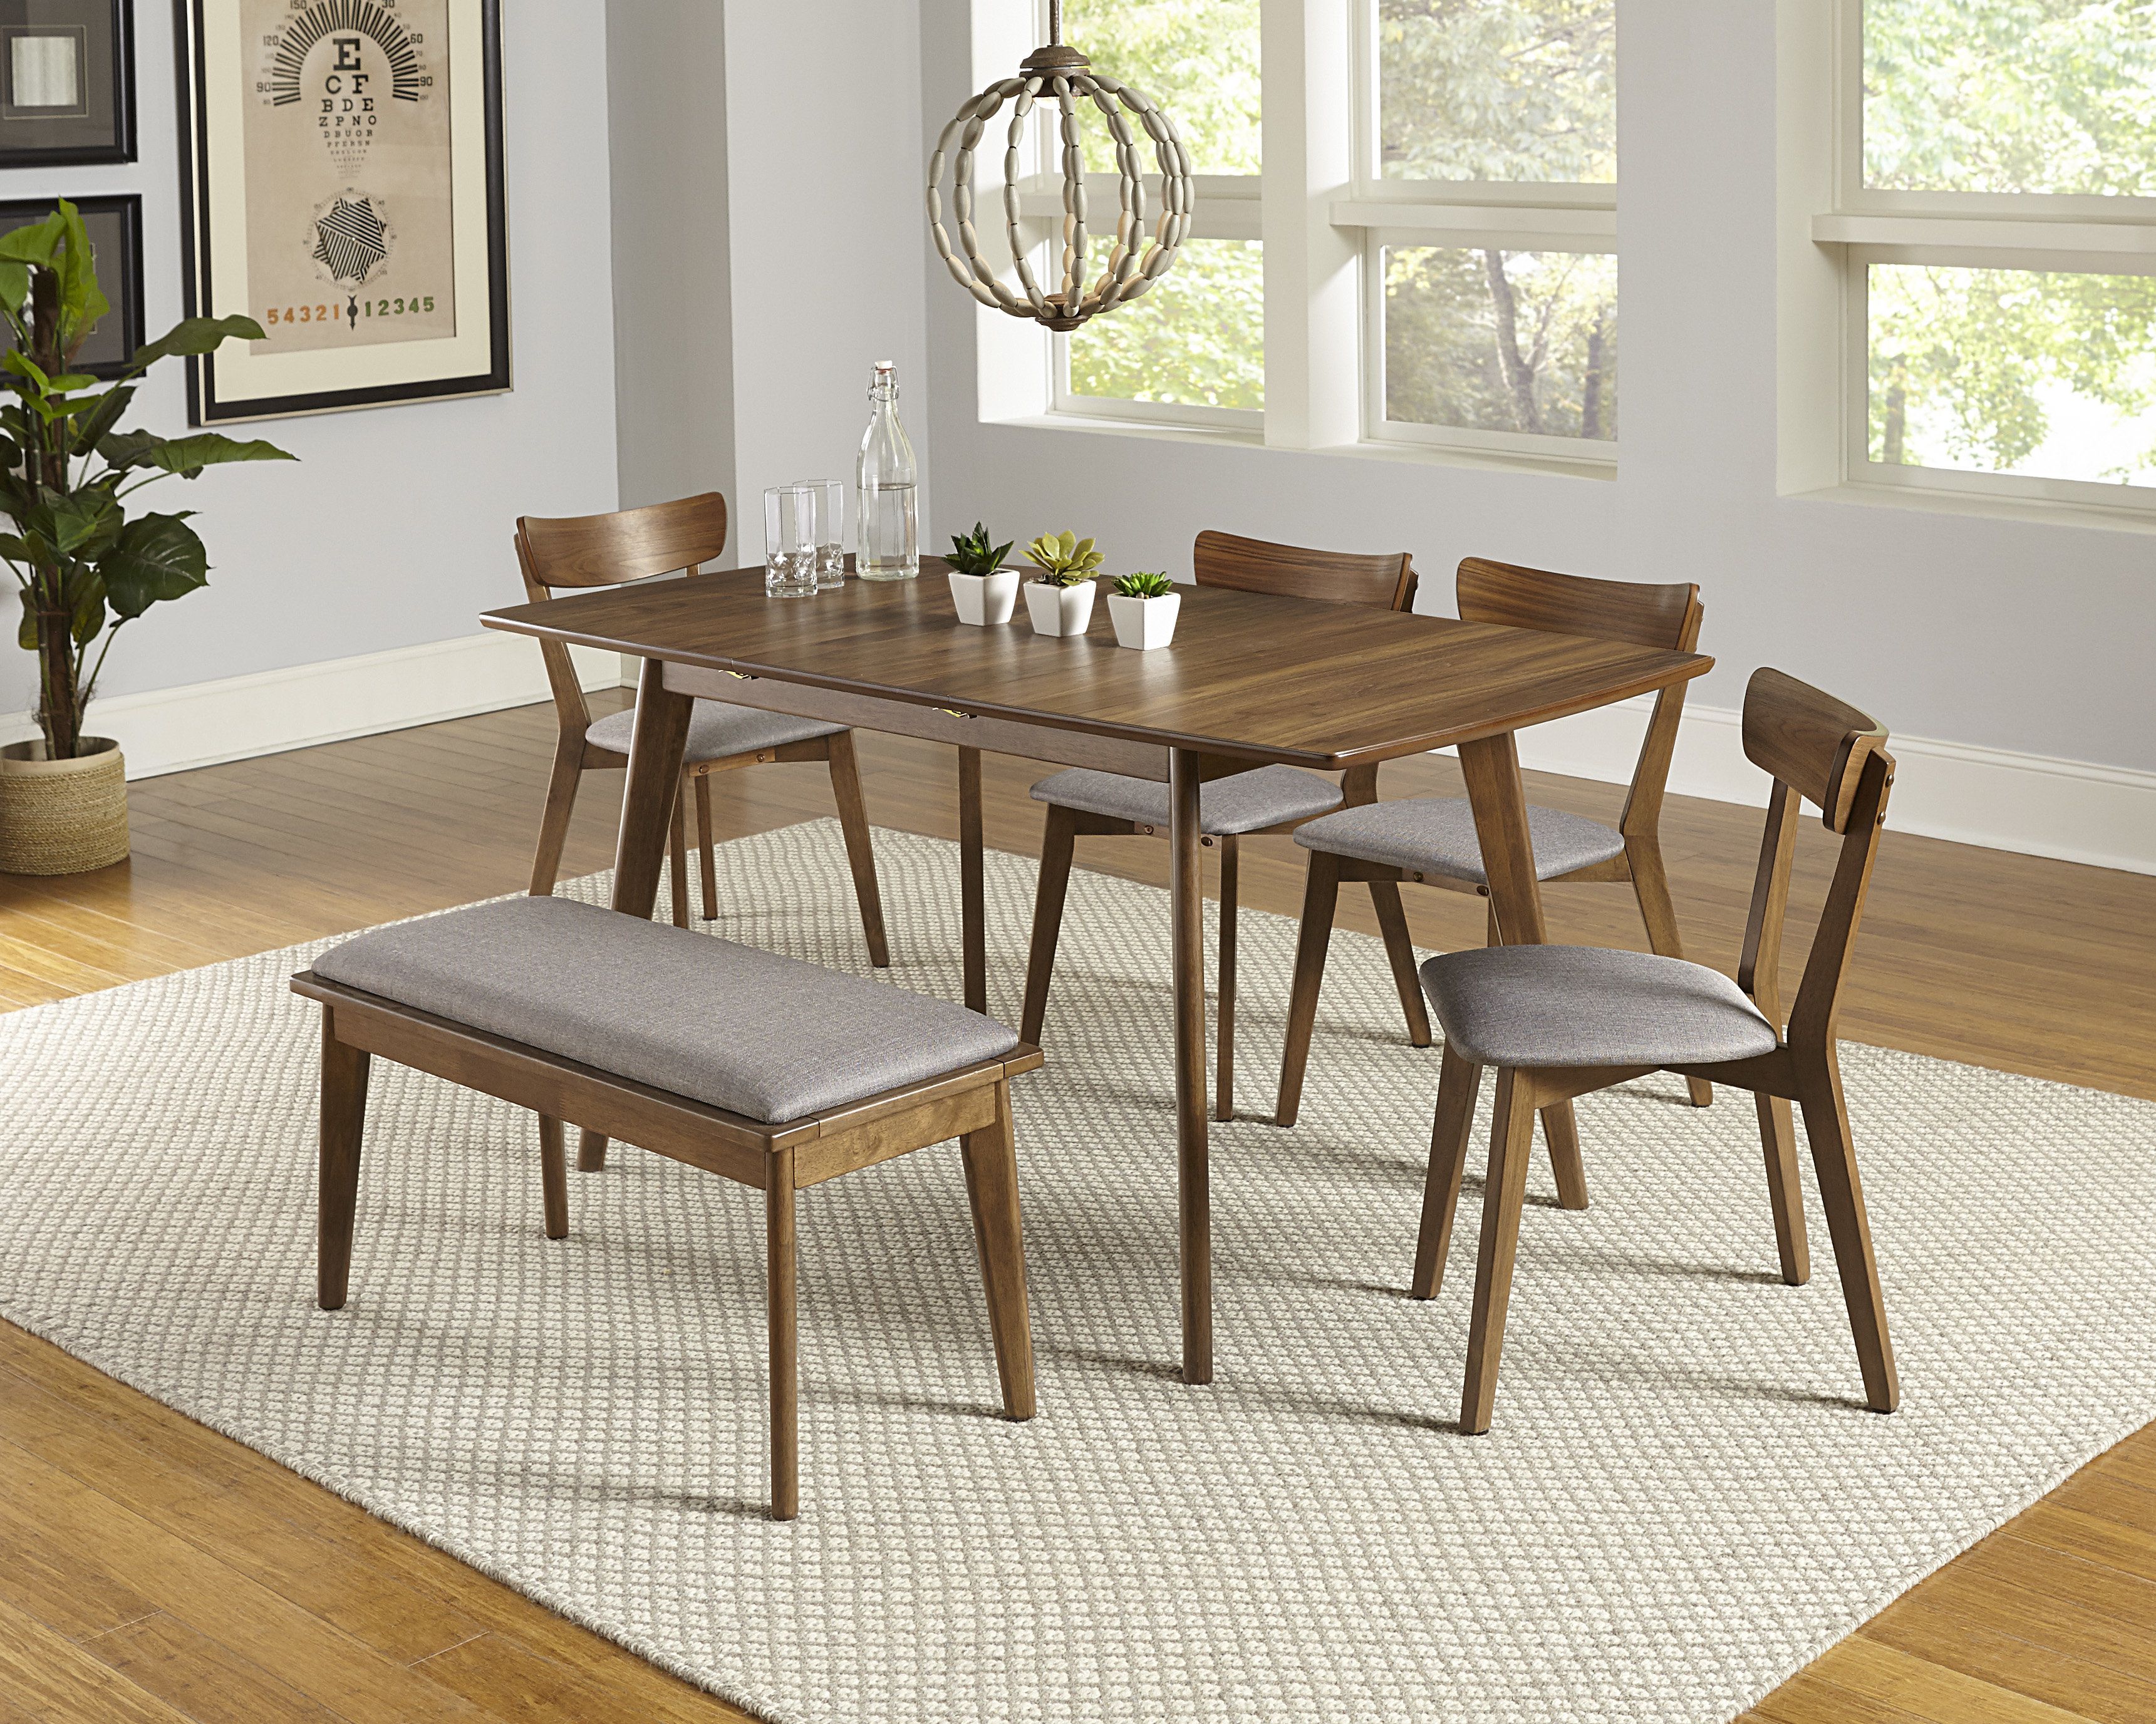 Rockaway 6 Piece Extendable Solid Wood Dining Set Intended For 2018 Kerley 4 Piece Dining Sets (View 8 of 20)